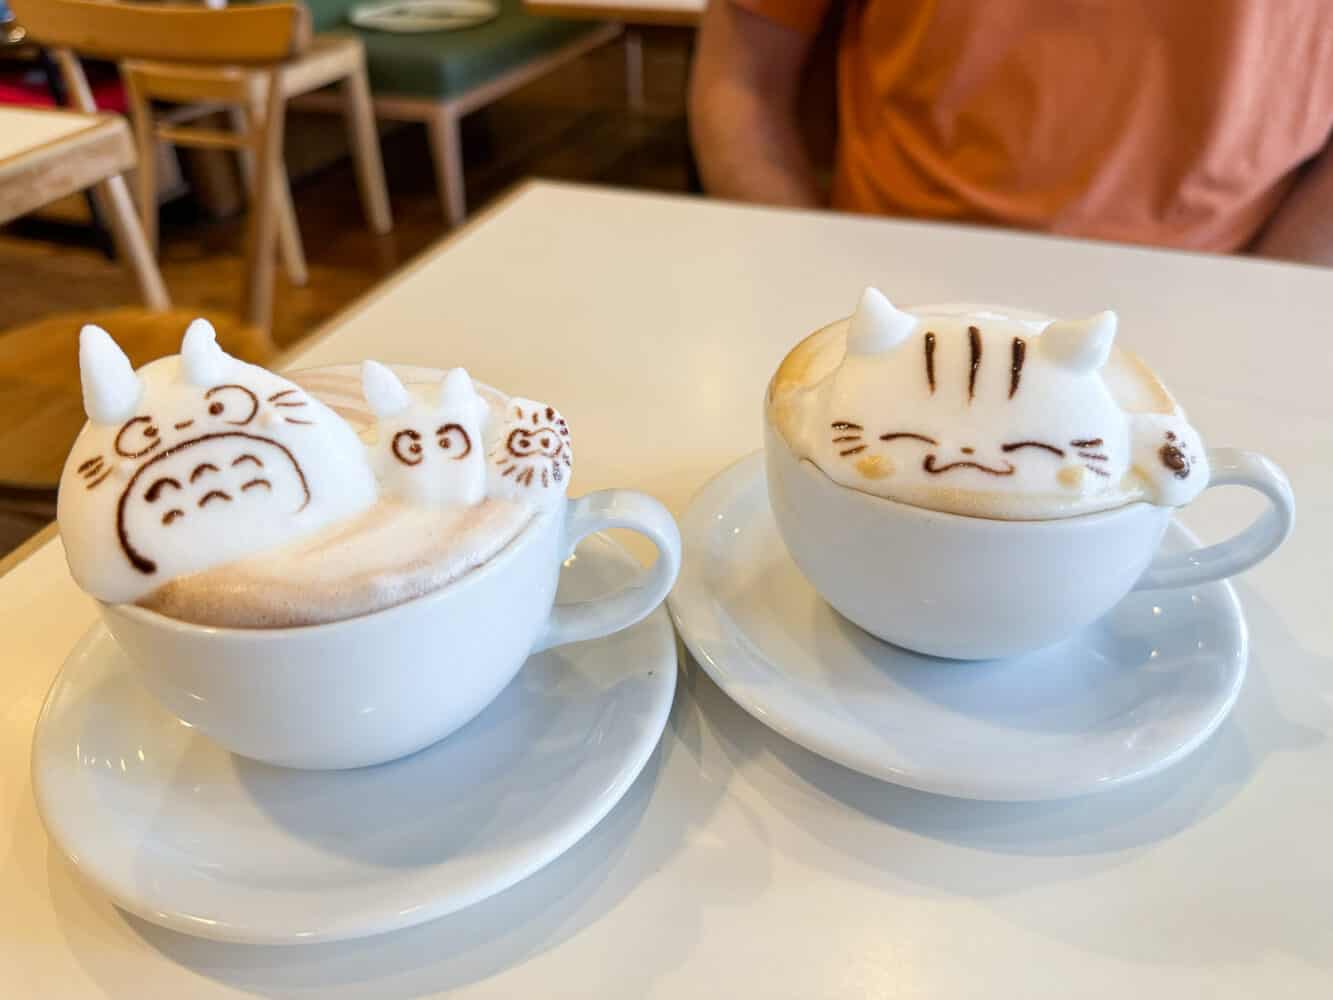 Totoro and cat 3d latte art drinks at Cafe Reissue, Tokyo